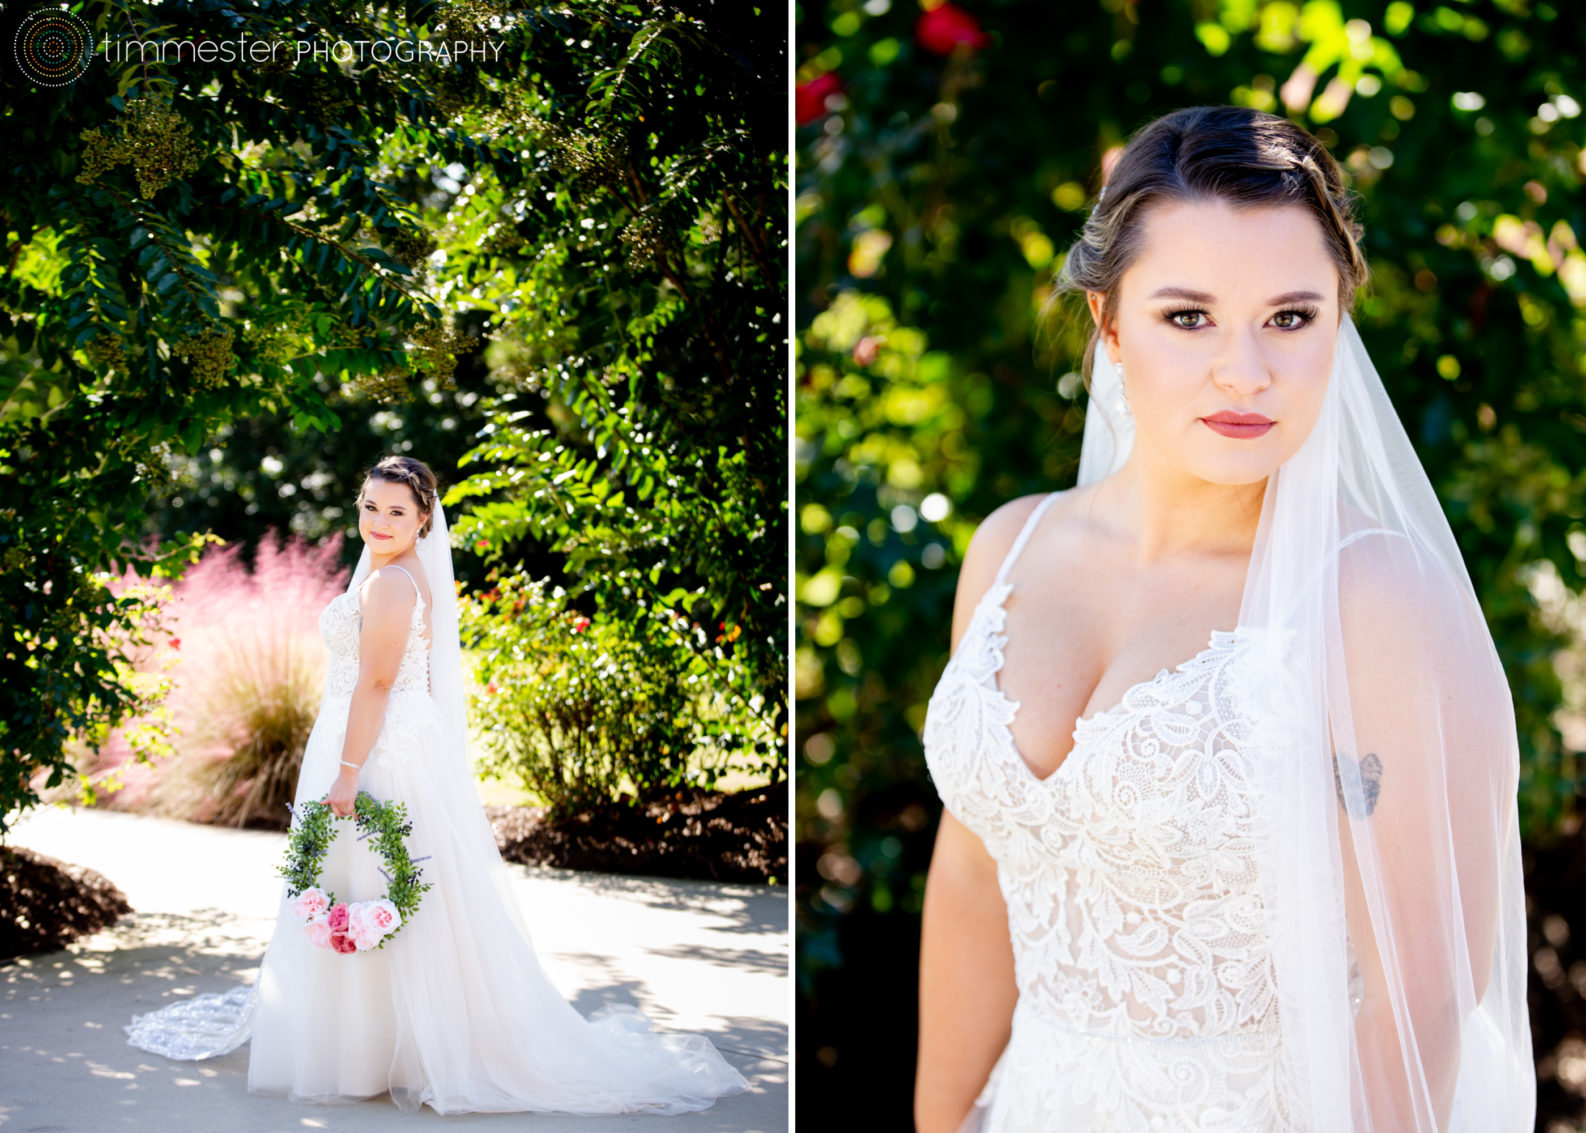 Beautiful bridal portraits for Hayley and Cody's wedding at Sugarneck